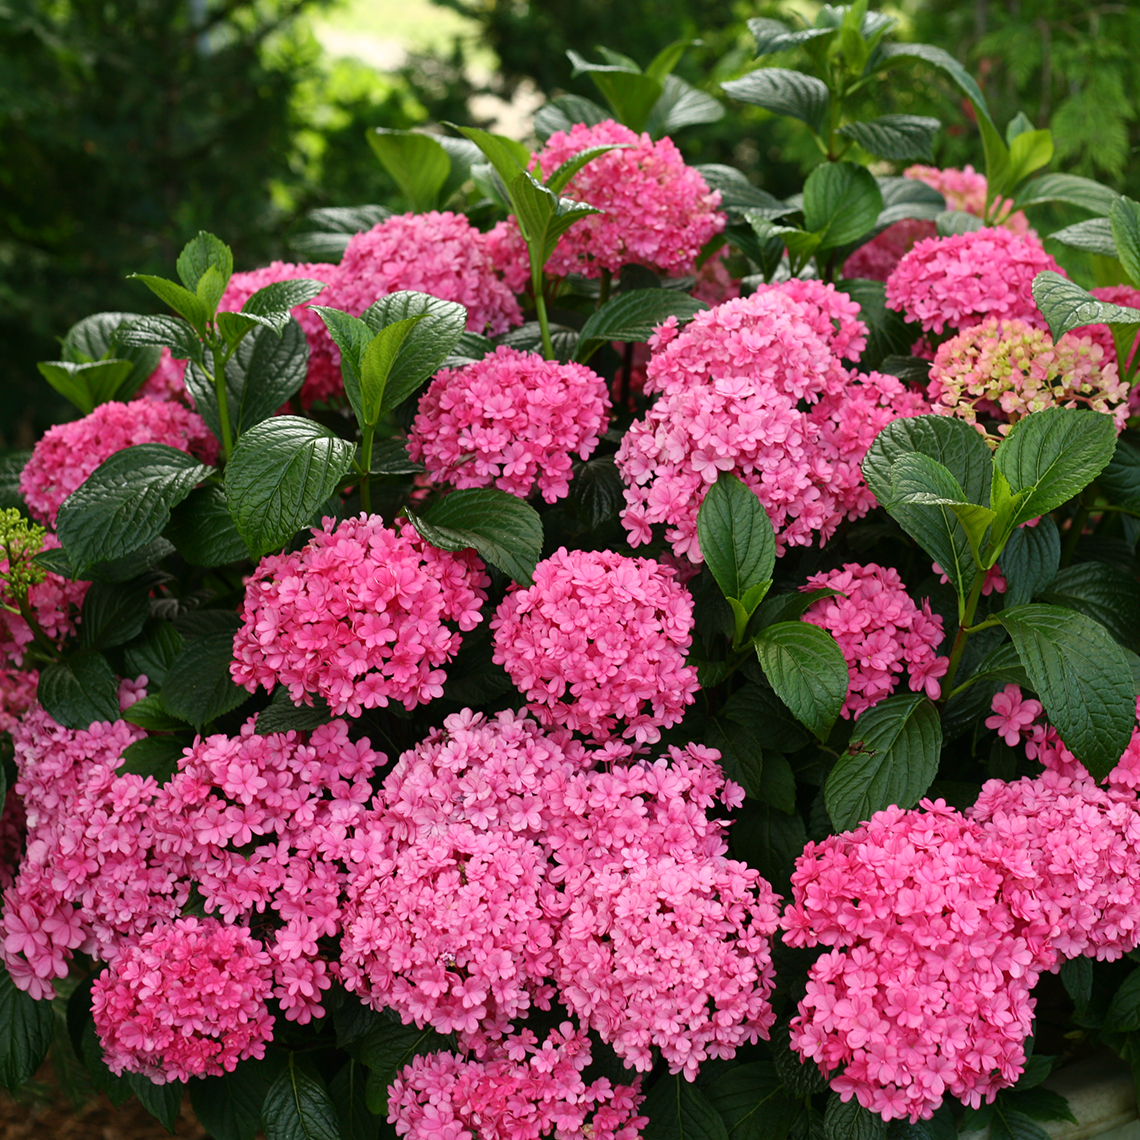 Paraplu hydrangea covered in bright pink mophead blooms and the foliage is very very glossy